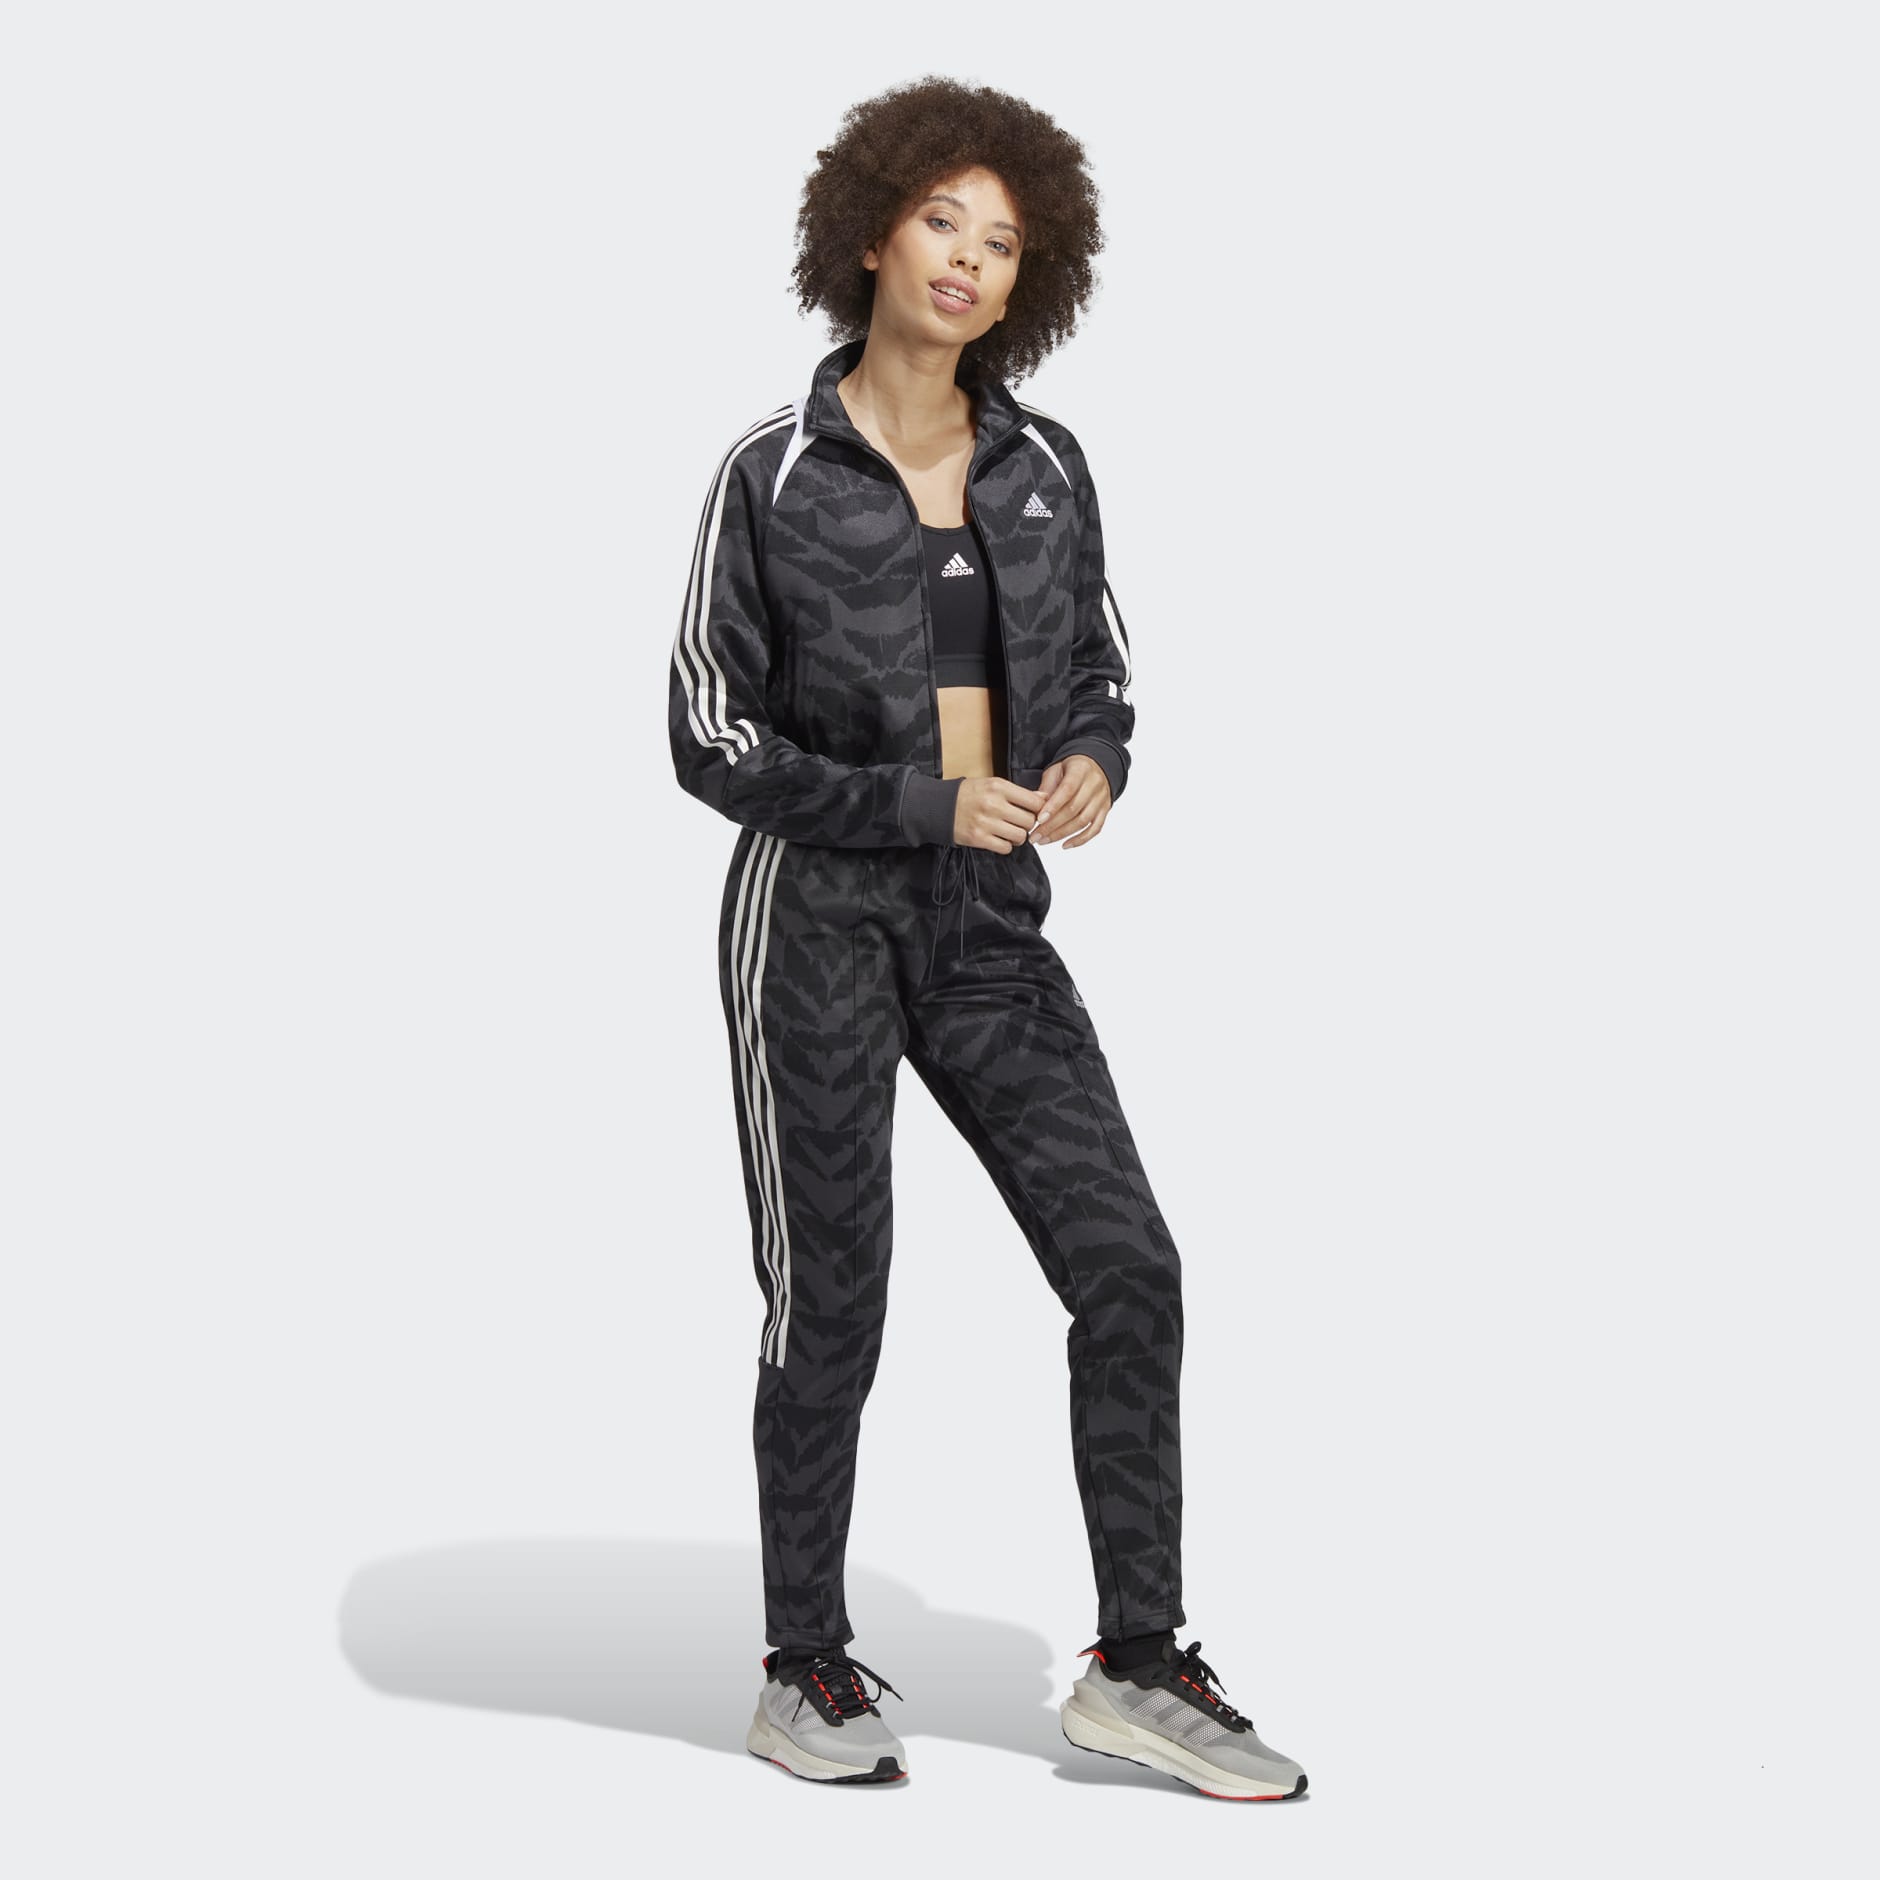 Clothing - Tiro Suit Up Lifestyle Track Top - Grey | adidas South Africa